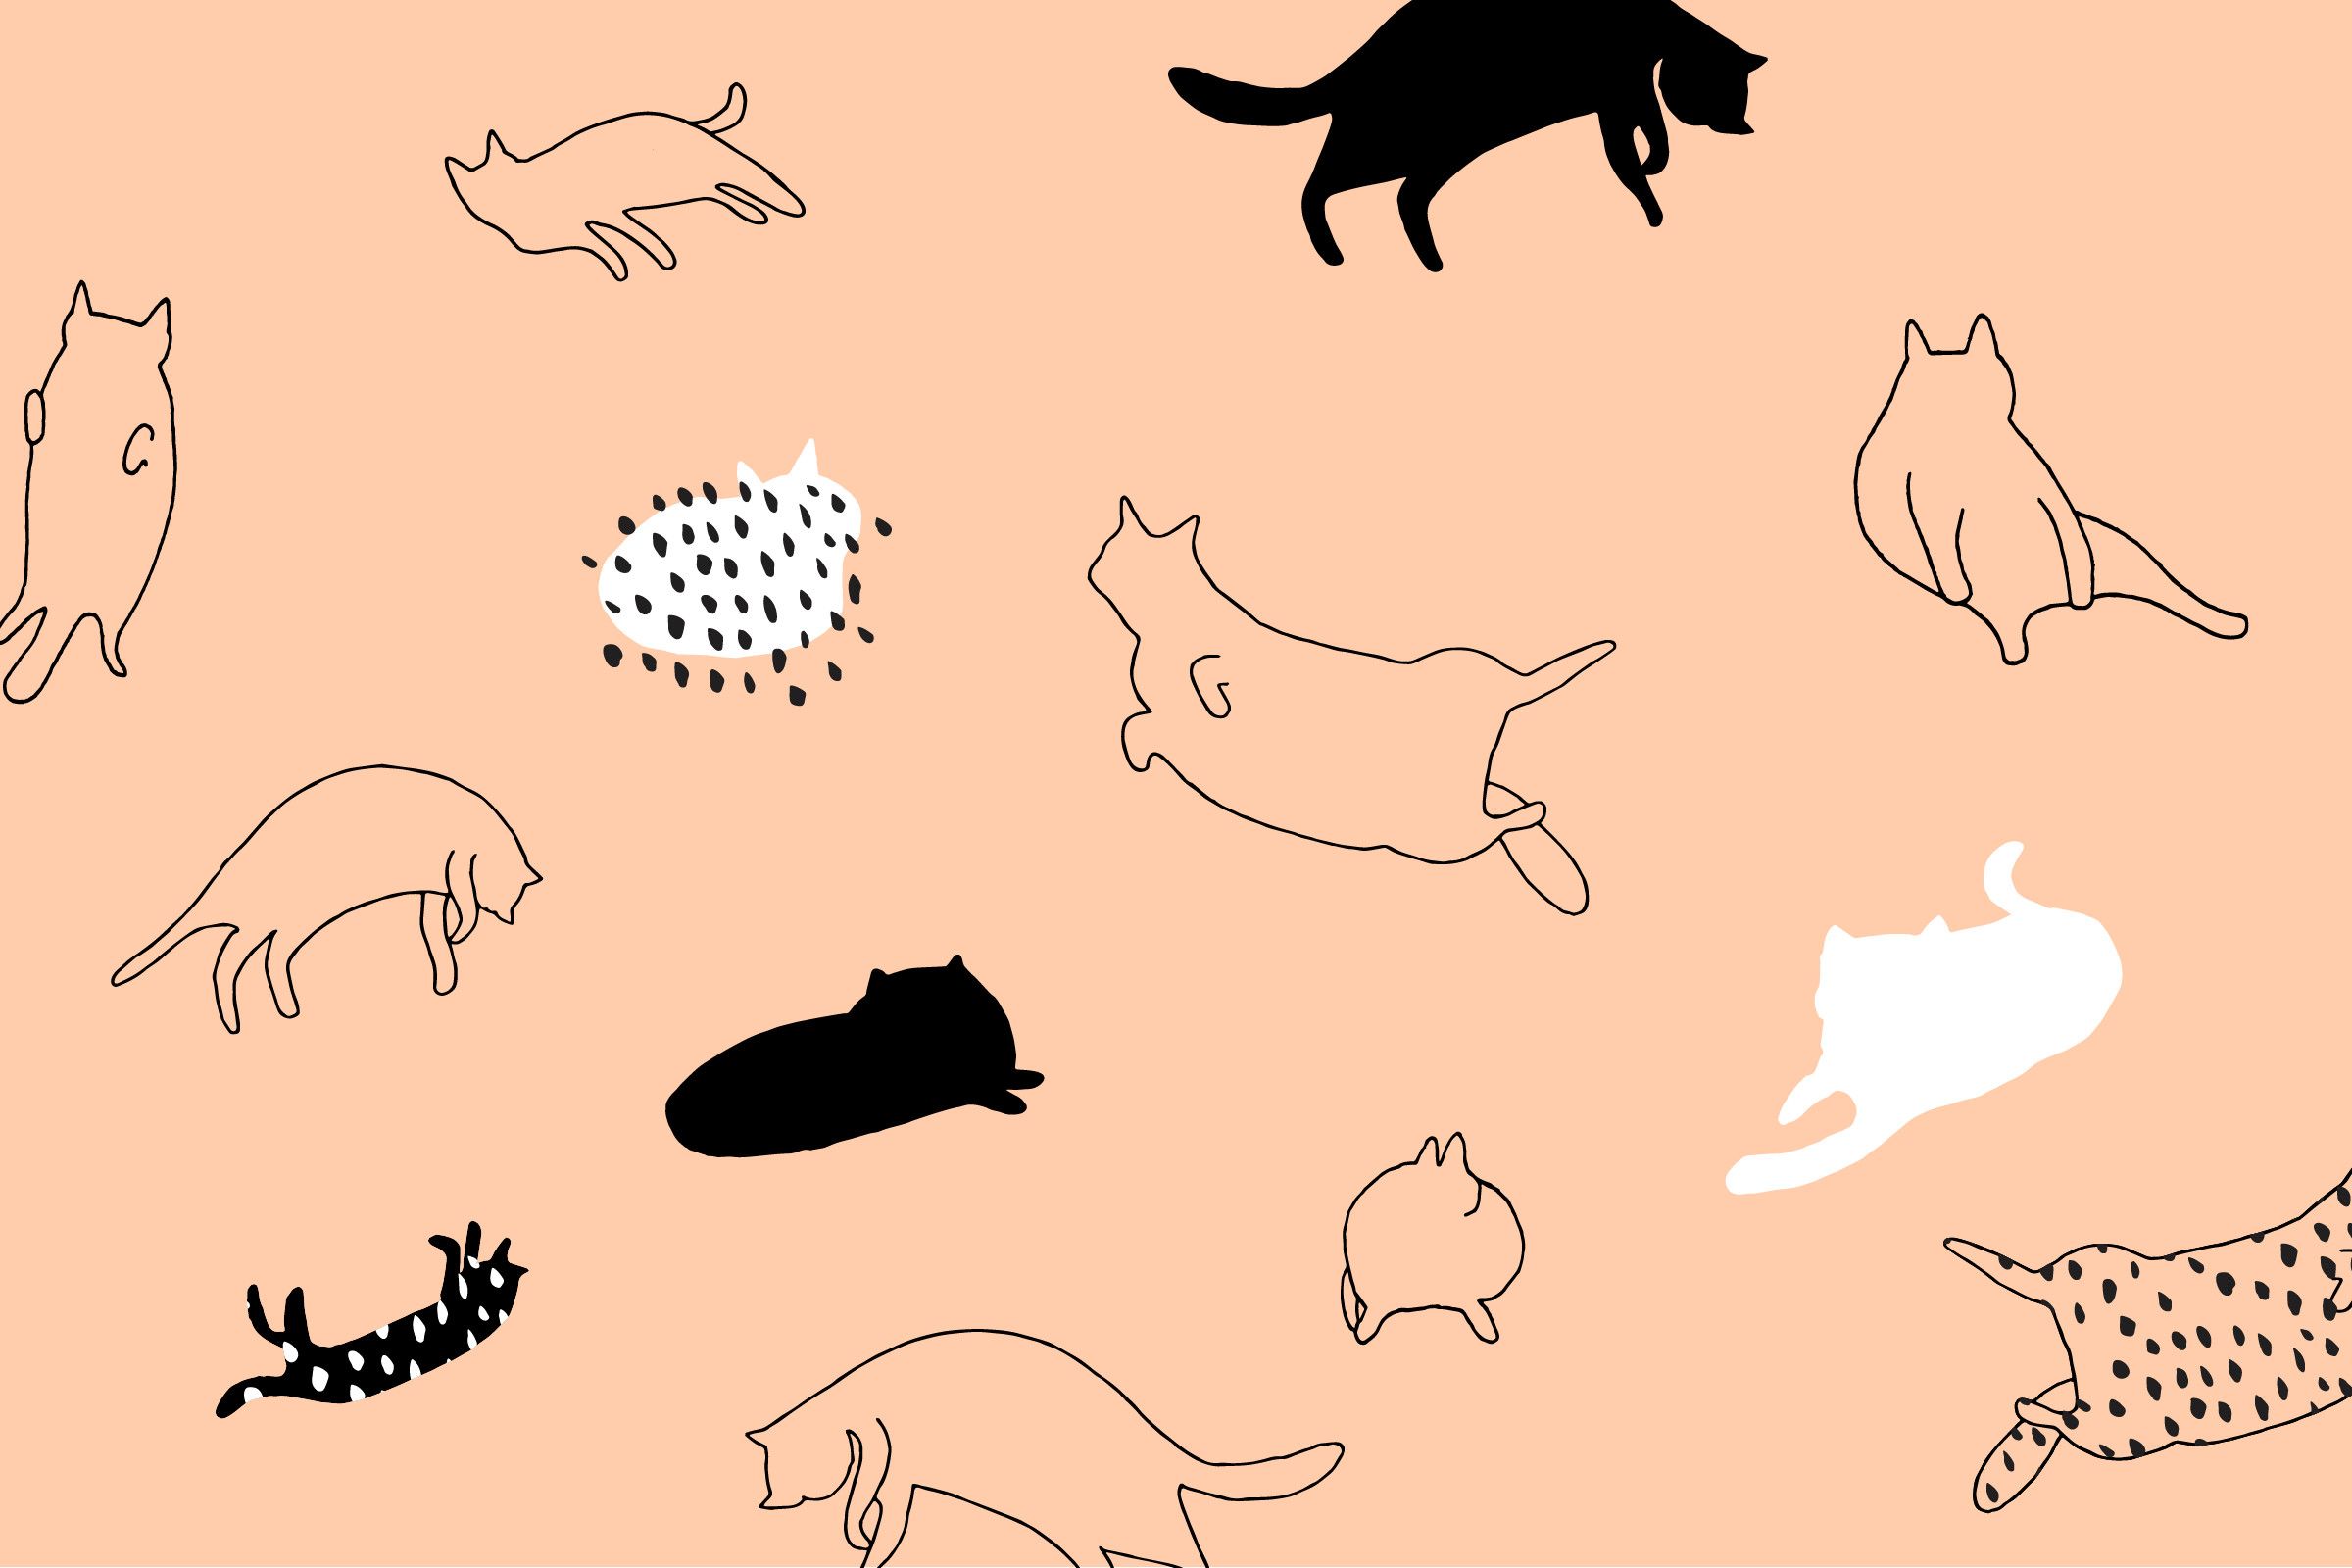 A cute pattern of cats in black and white on a salmon pink background - Pusheen